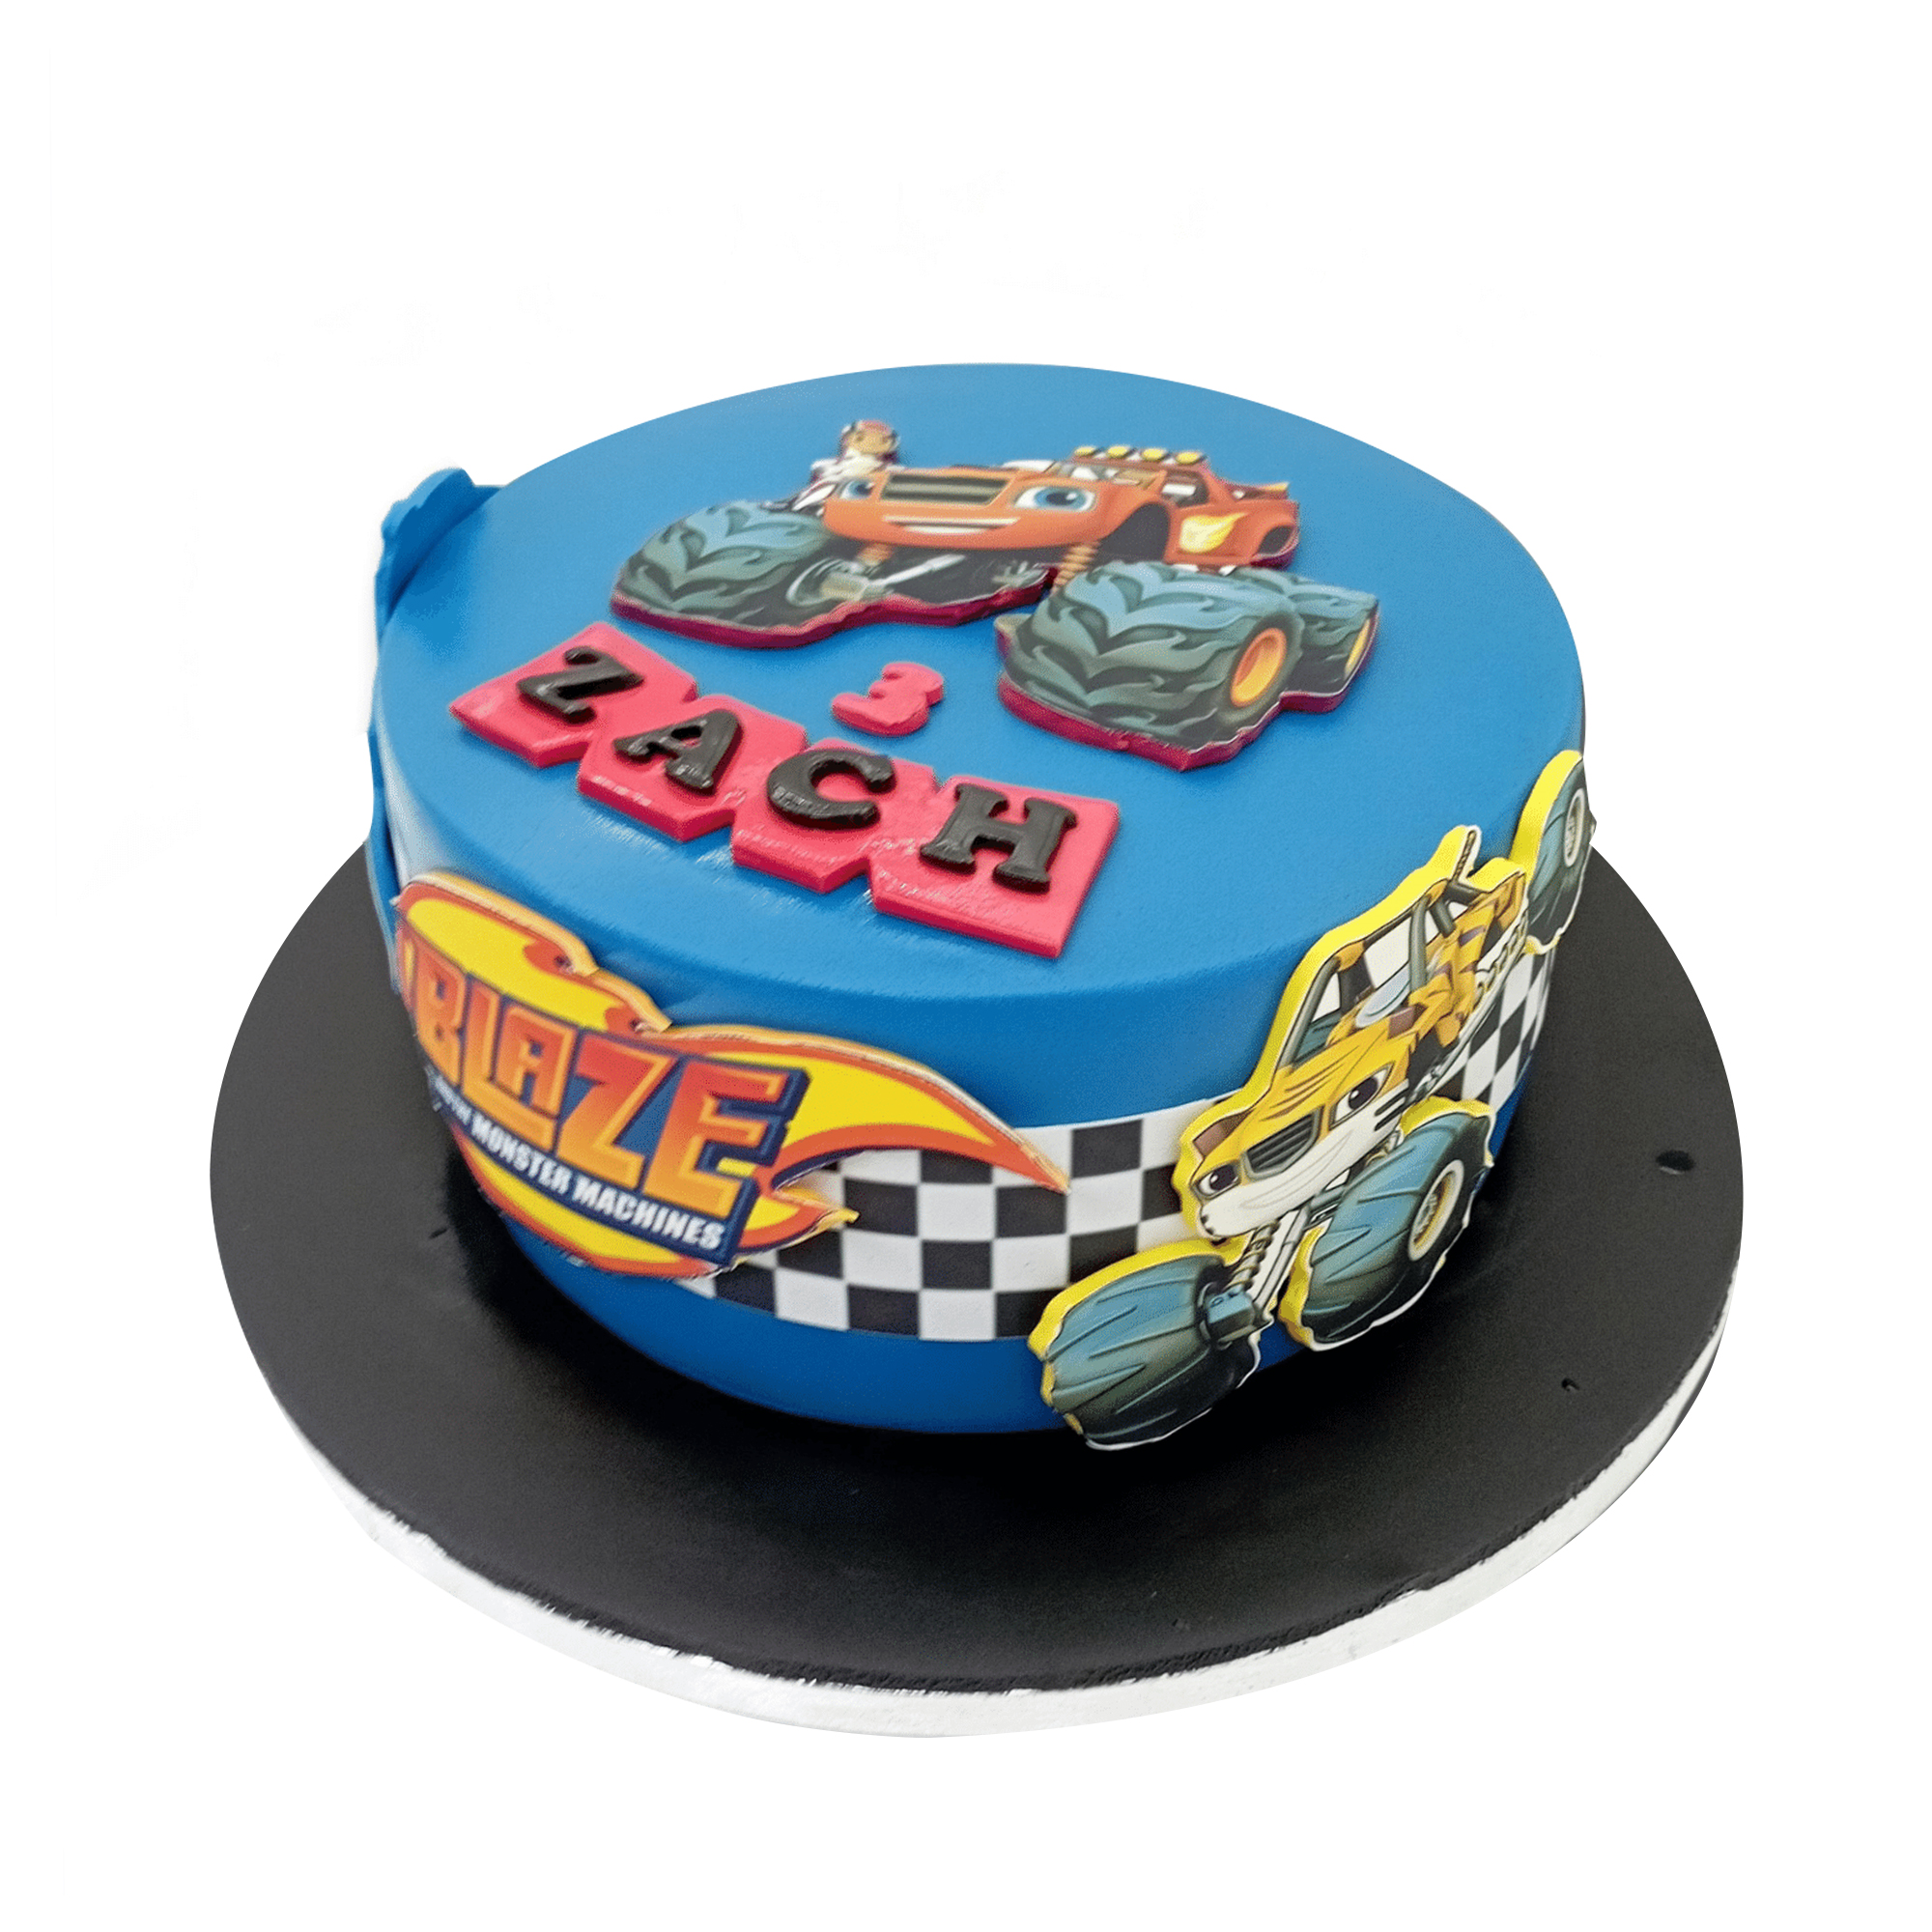 Blaze and the Monster Machines Cake